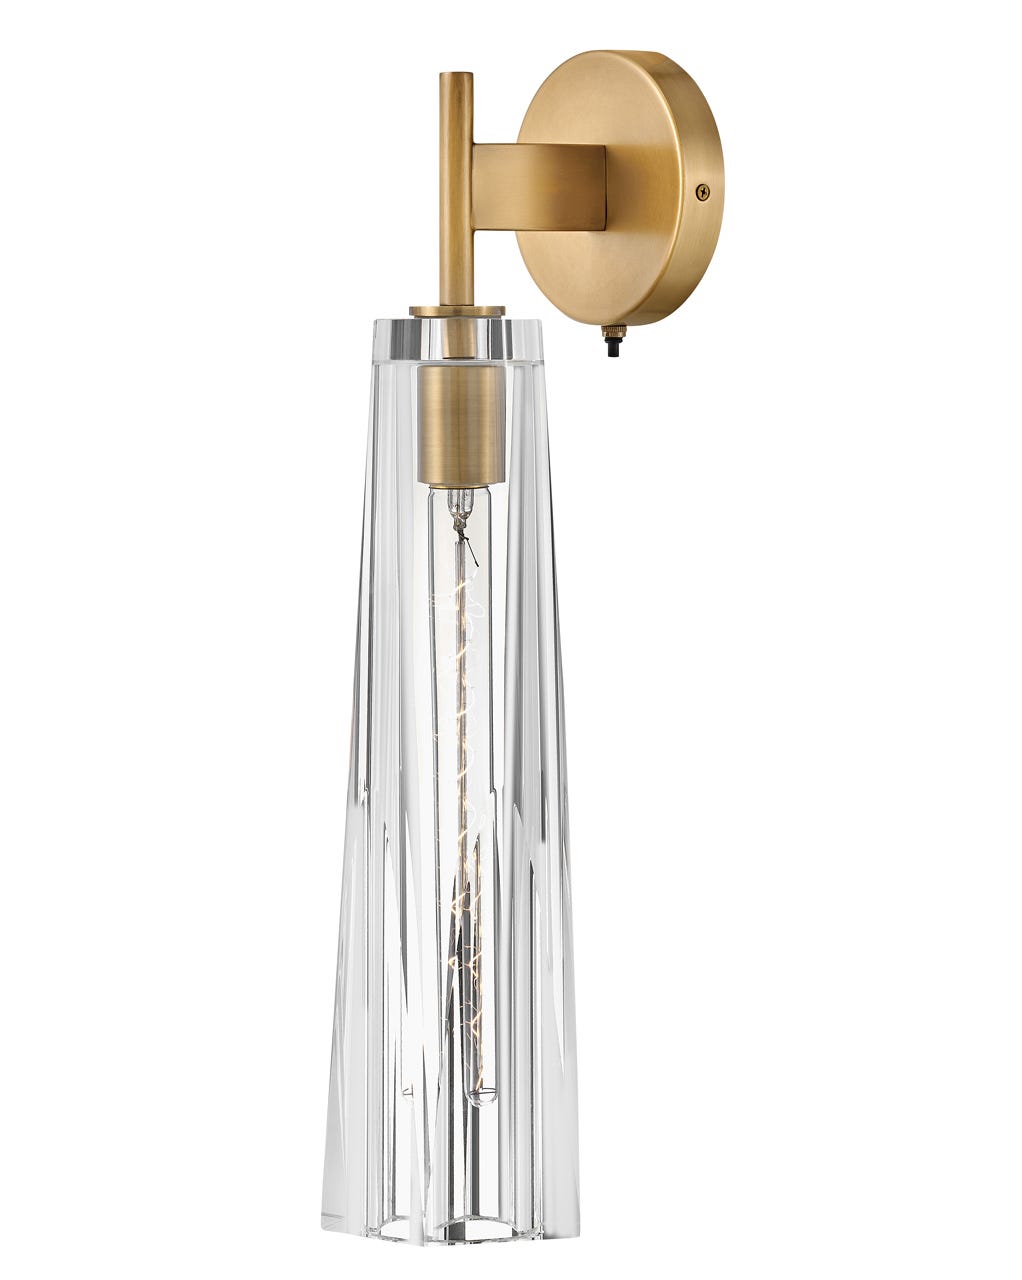 Hinkley Cosette Sconce Sconce Hinkley Heritage Brass with Clear glass 6.75x5.0x21.0 